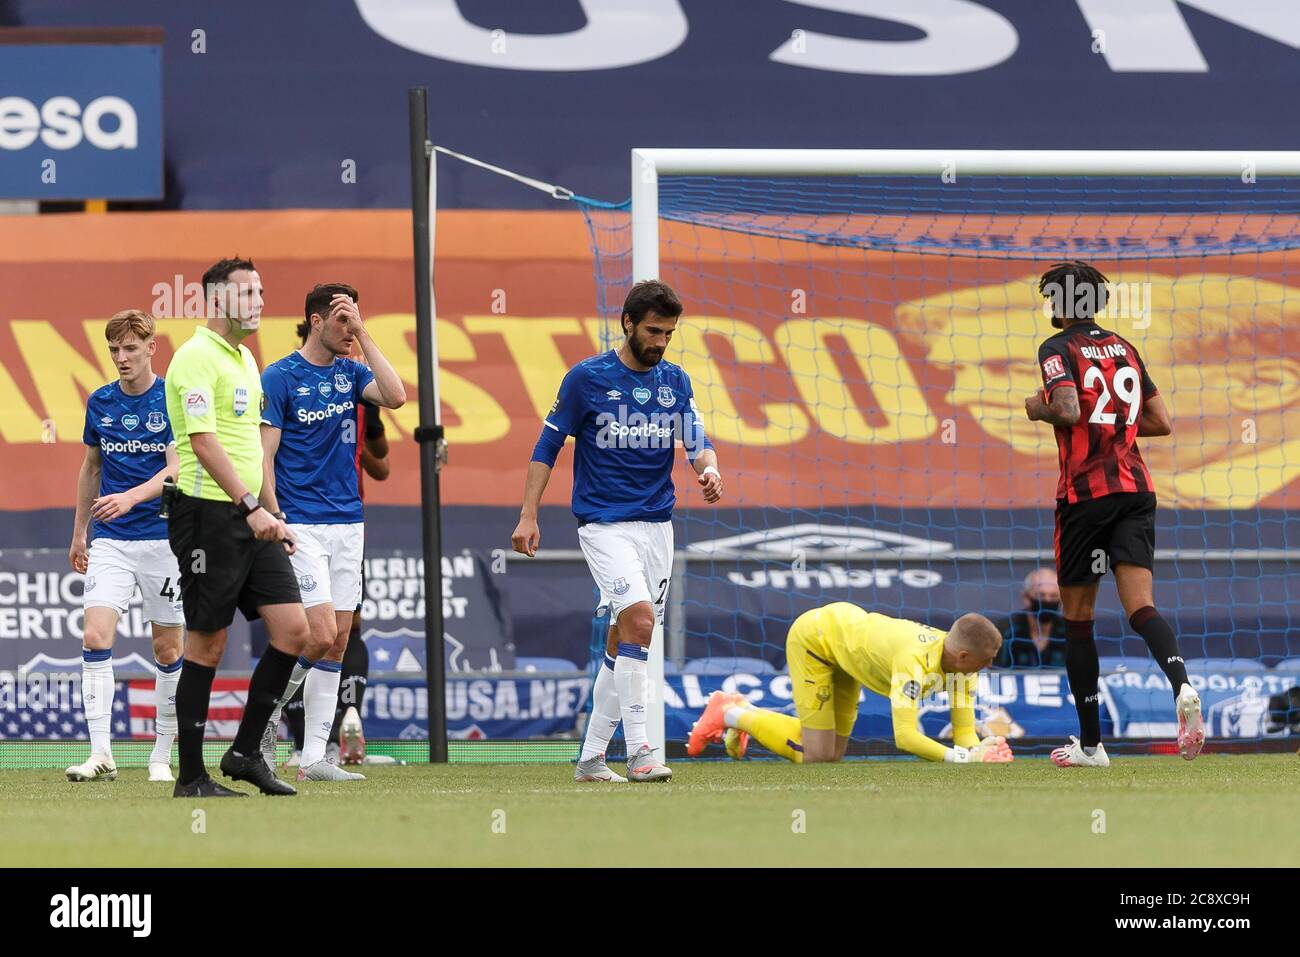 Liverpool, UK. 26th July, 2020. Andre Gomes of Everton looks dejected after his side concede their third goal to make the score 1-3 during the Premier League match between Everton and Bournemouth at Goodison Park on July 26th 2020 in Liverpool, England. (Photo by Daniel Chesterton/phcimages.com) Credit: PHC Images/Alamy Live News Stock Photo